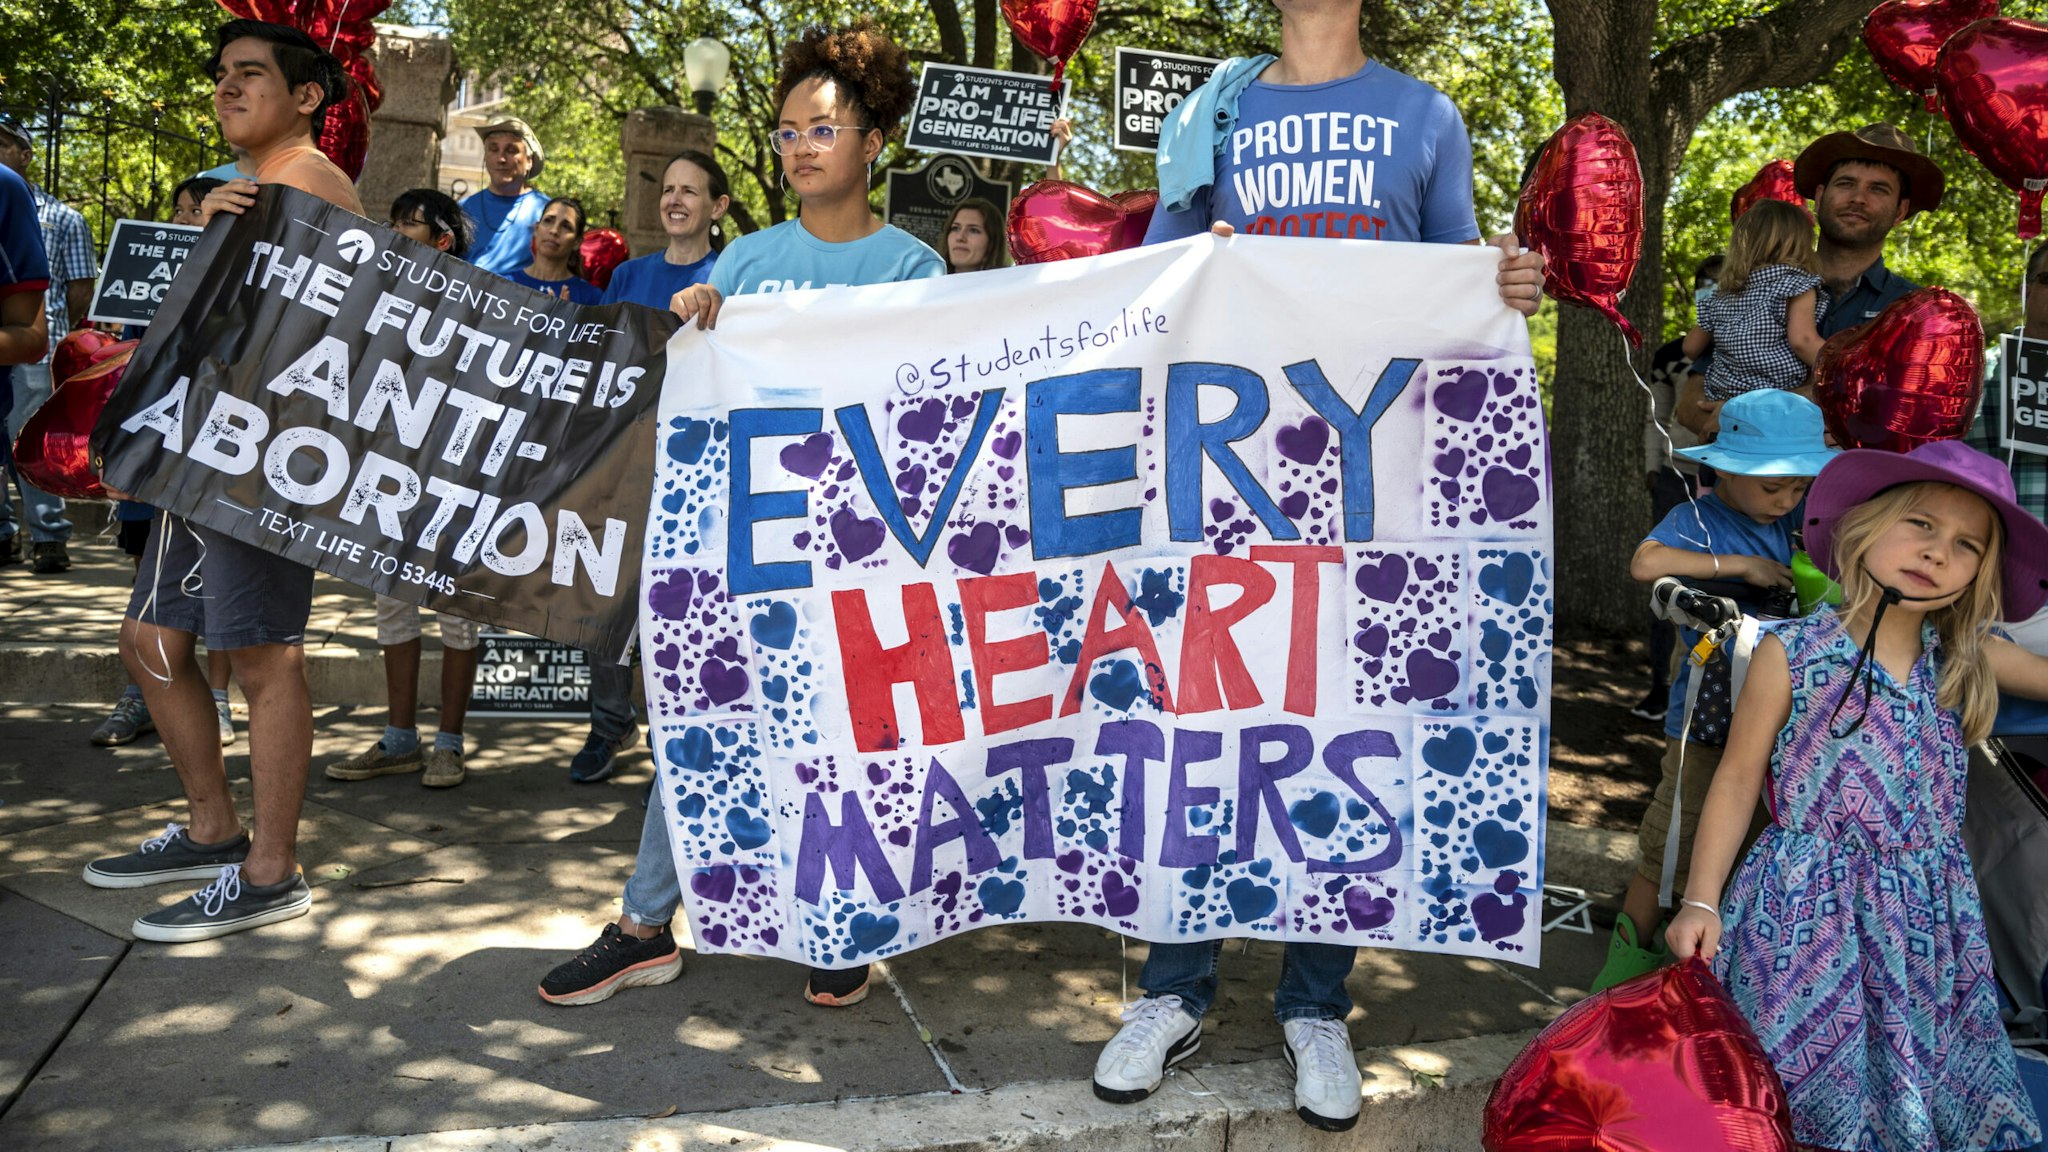 AUSTIN, TX - MAY 29: Pro-life protesters stand near the gate of the Texas state capitol at a protest outside the Texas state capitol on May 29, 2021 in Austin, Texas. Thousands of protesters came out in response to a new bill outlawing abortions after a fetal heartbeat is detected signed on Wednesday by Texas Governor Greg Abbot.